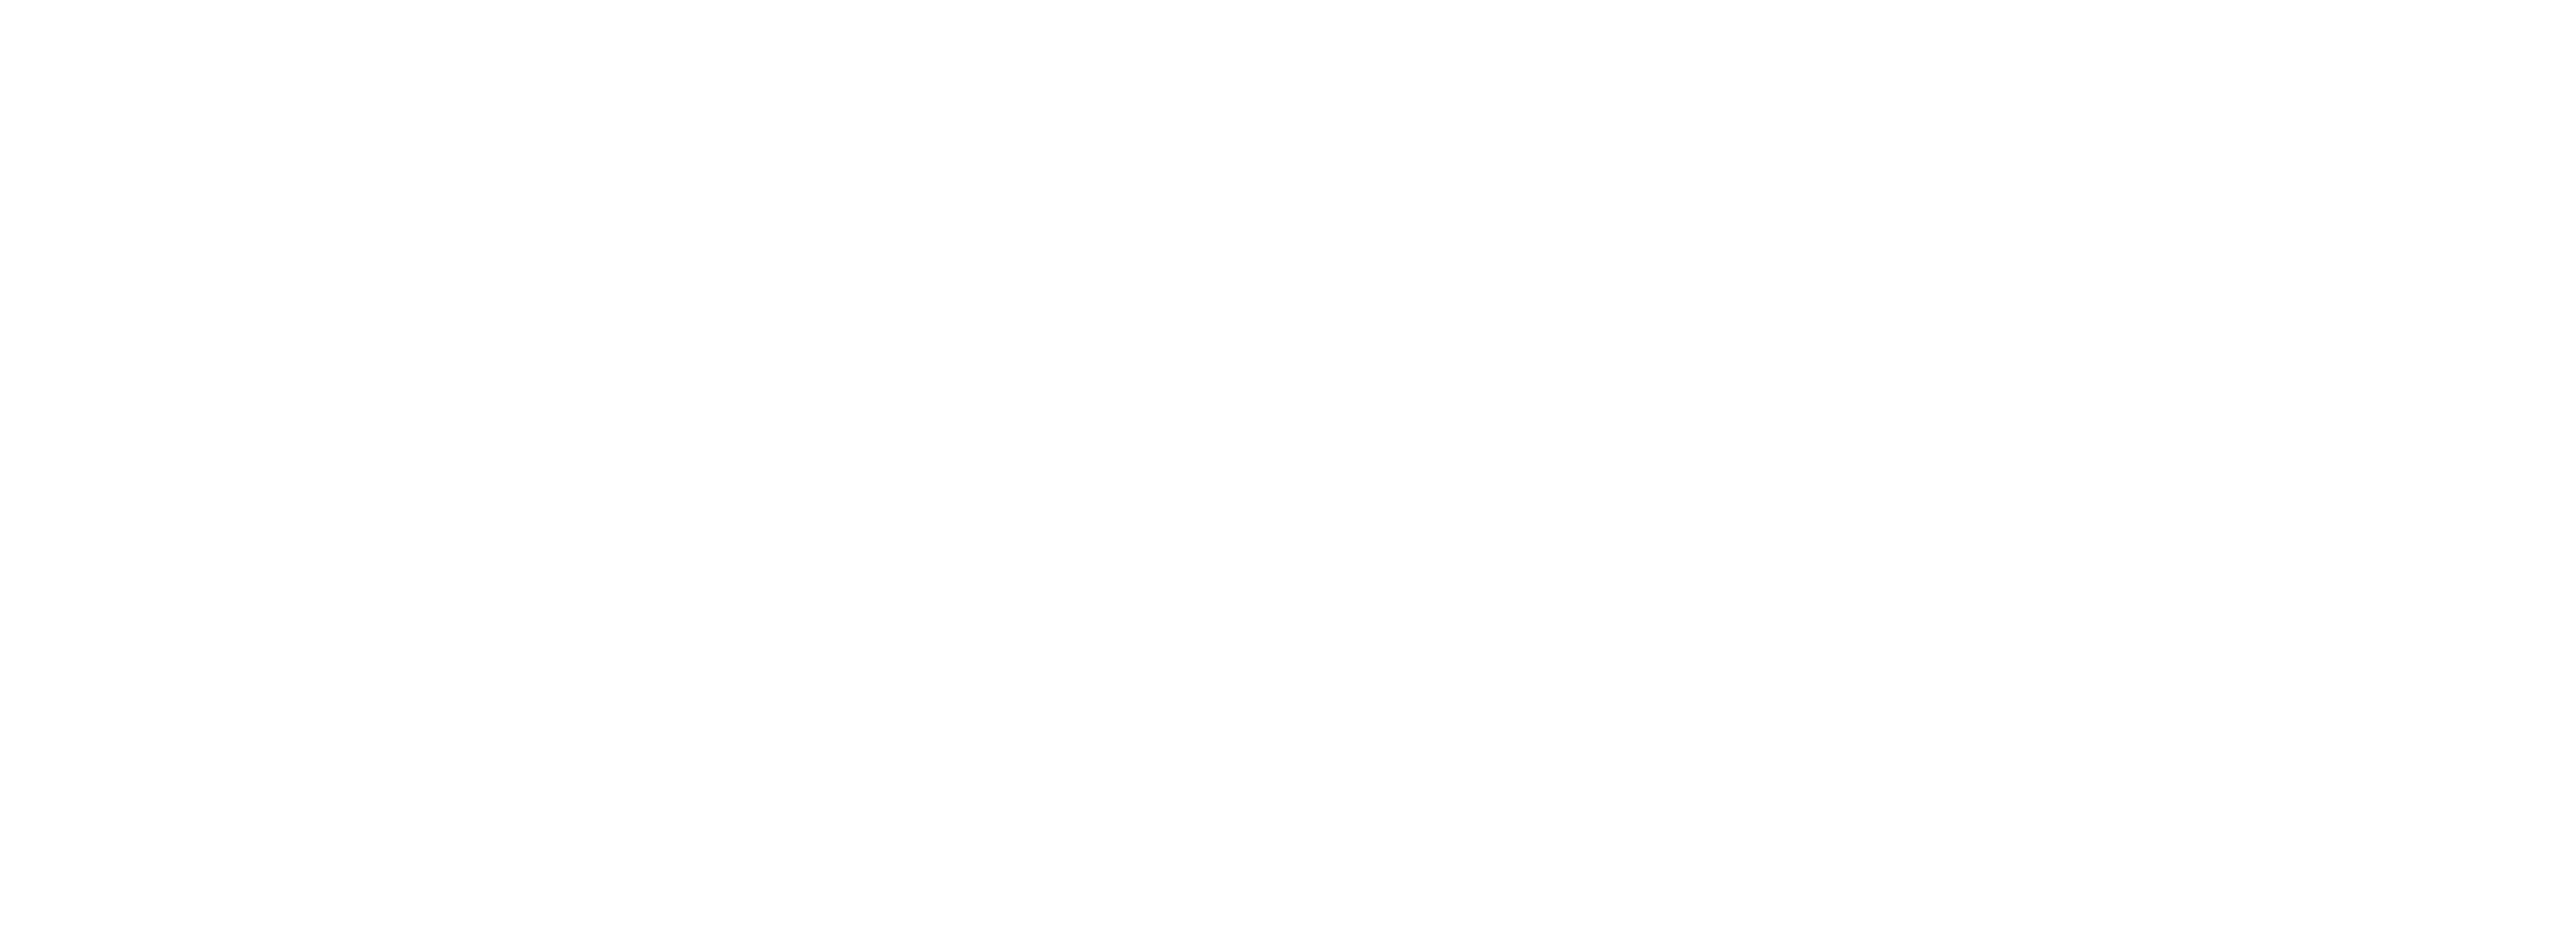 SWEHQ - Software Engineers High Quality